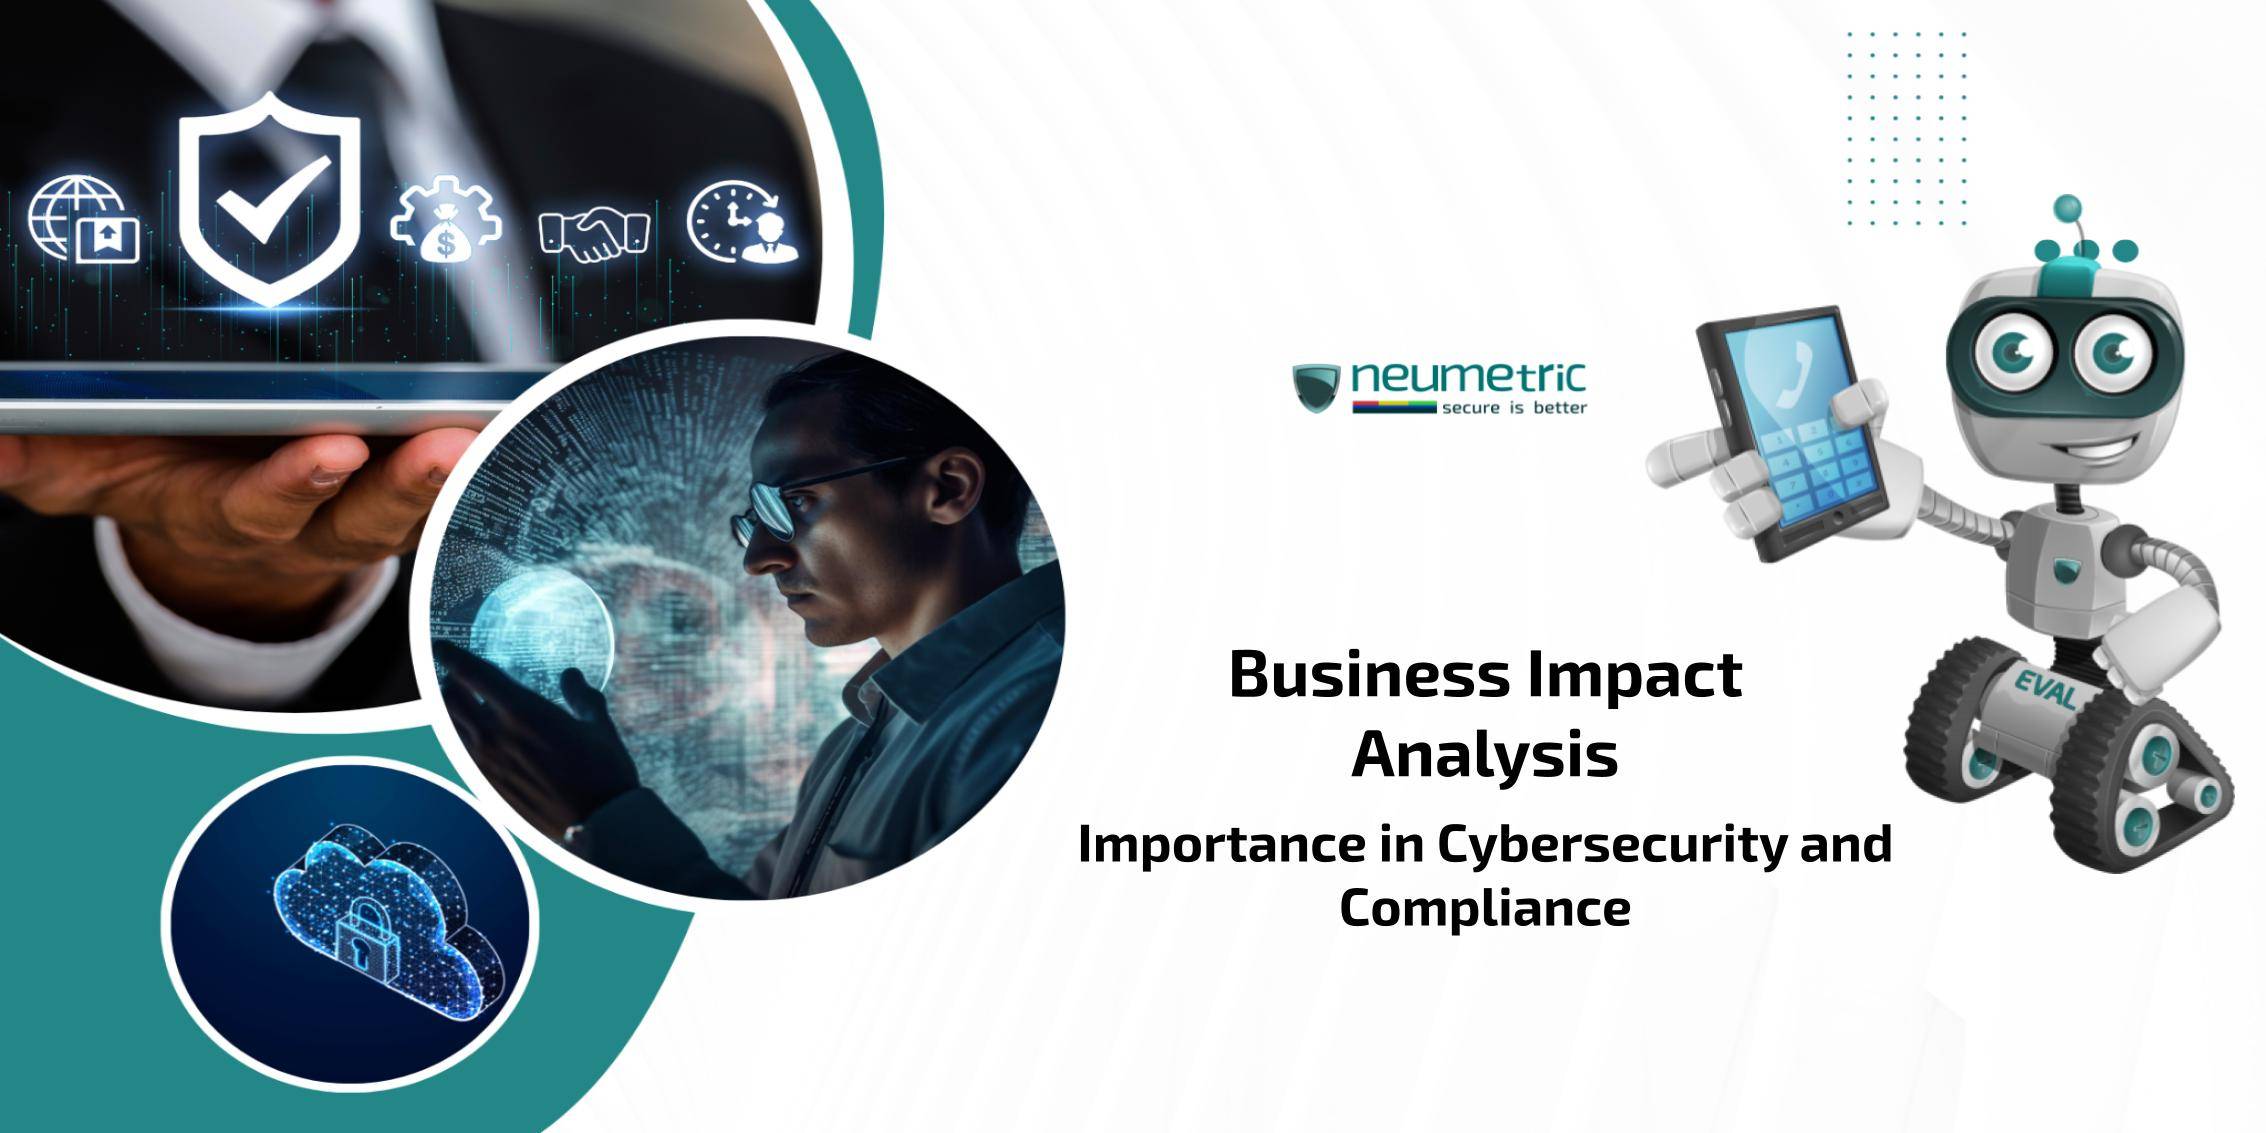 Business Impact Analysis: Importance in Cybersecurity & Compliance